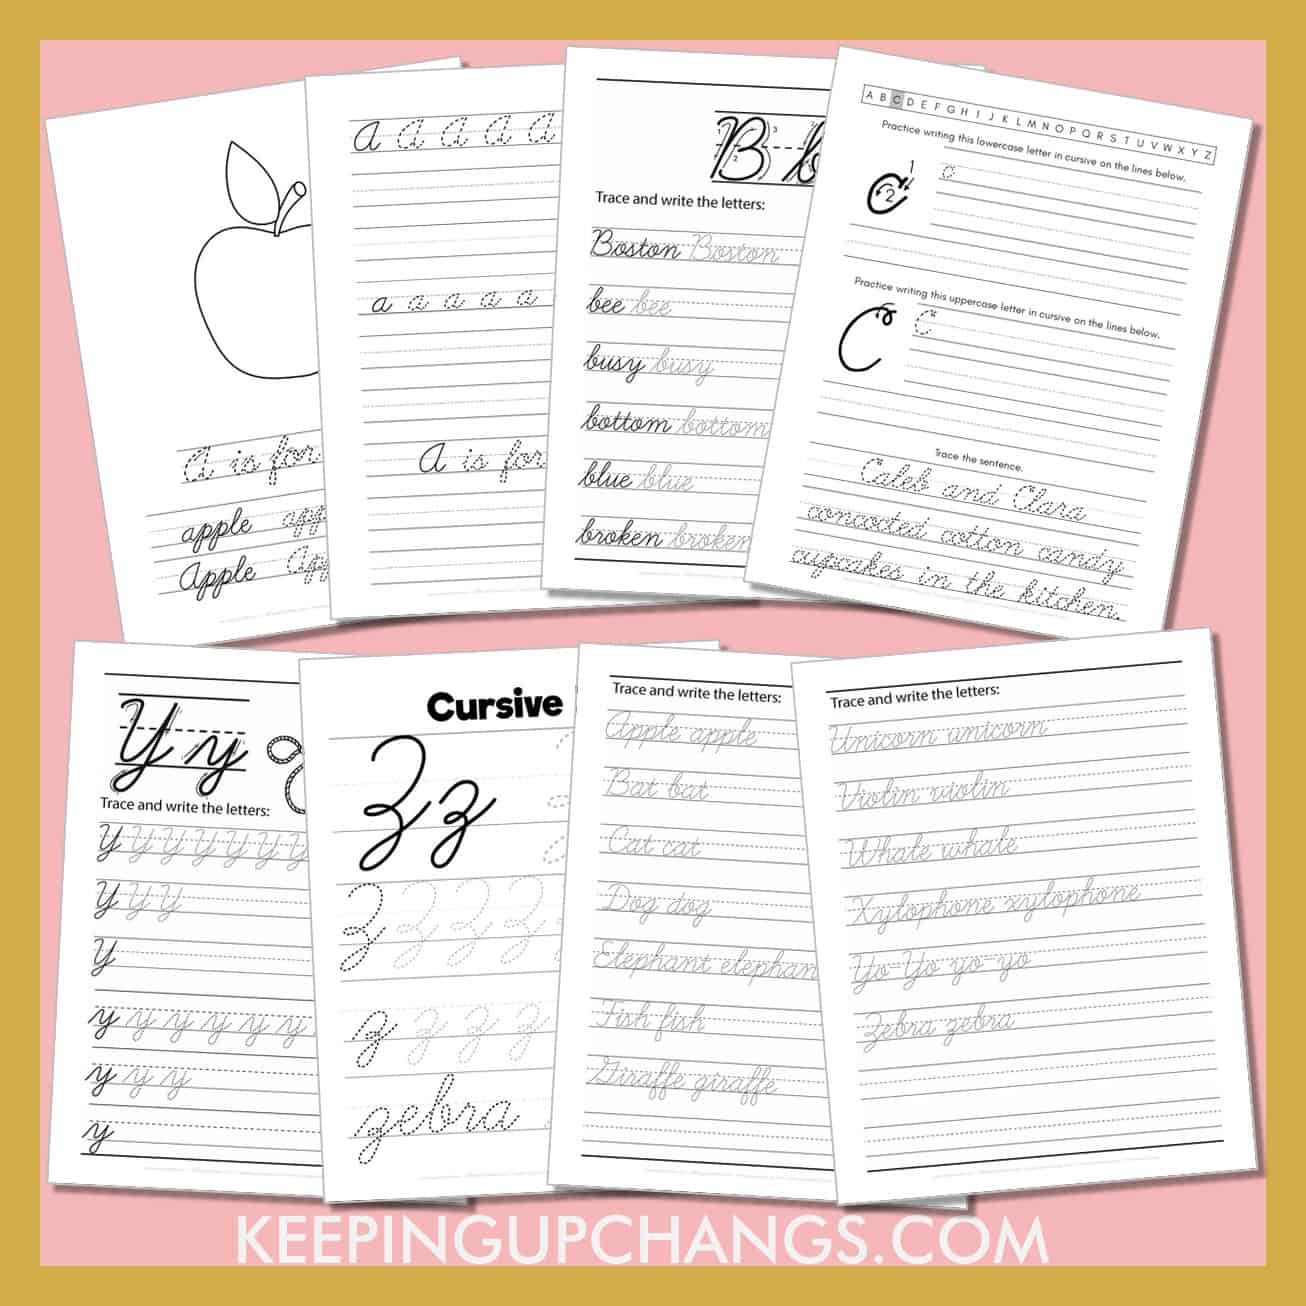 free cursive worksheet printables for elementary, middle, and high school.